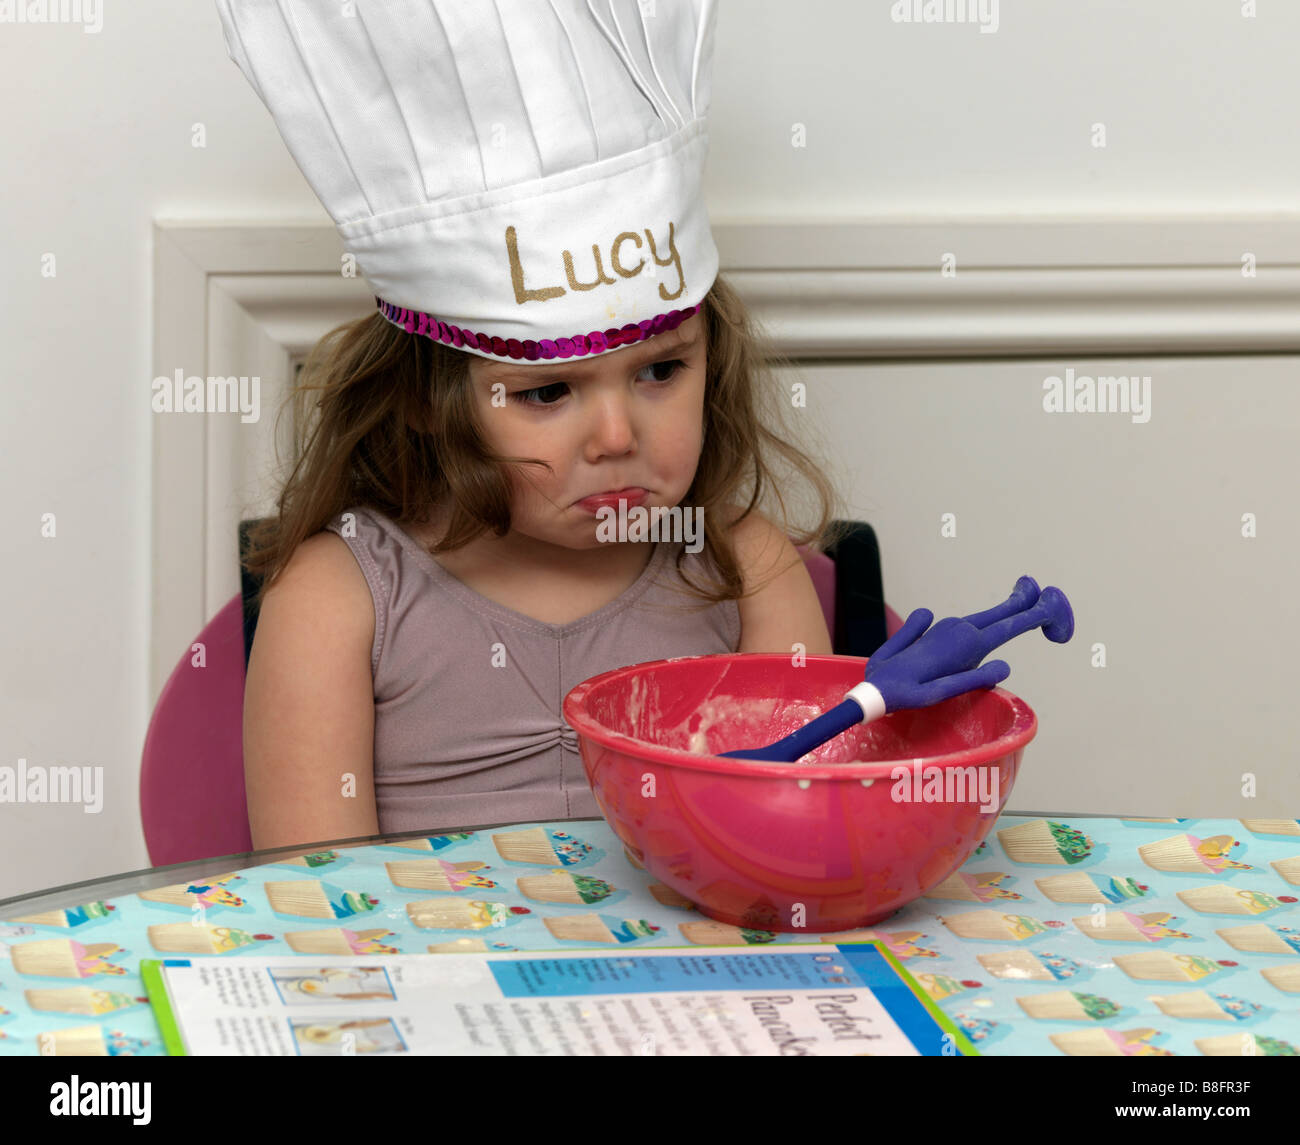 Making Pancakes on Shrove Tuesday Child with Chef s Hat Pouting Stock Photo